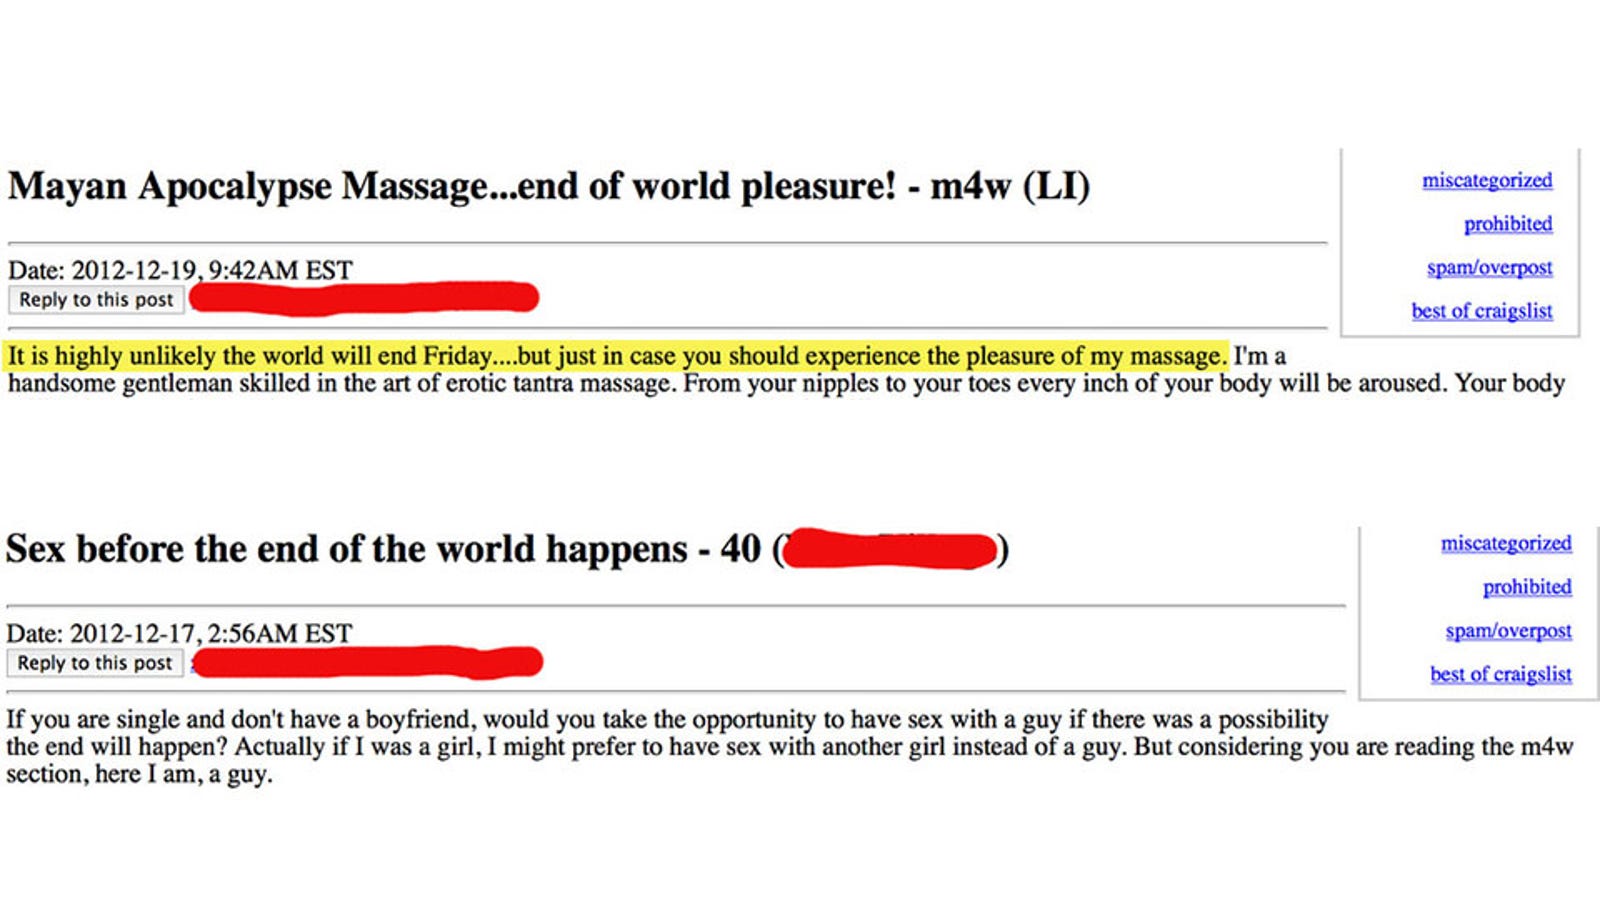 The Best Craigslist Ads of the Mayan Apocalypse